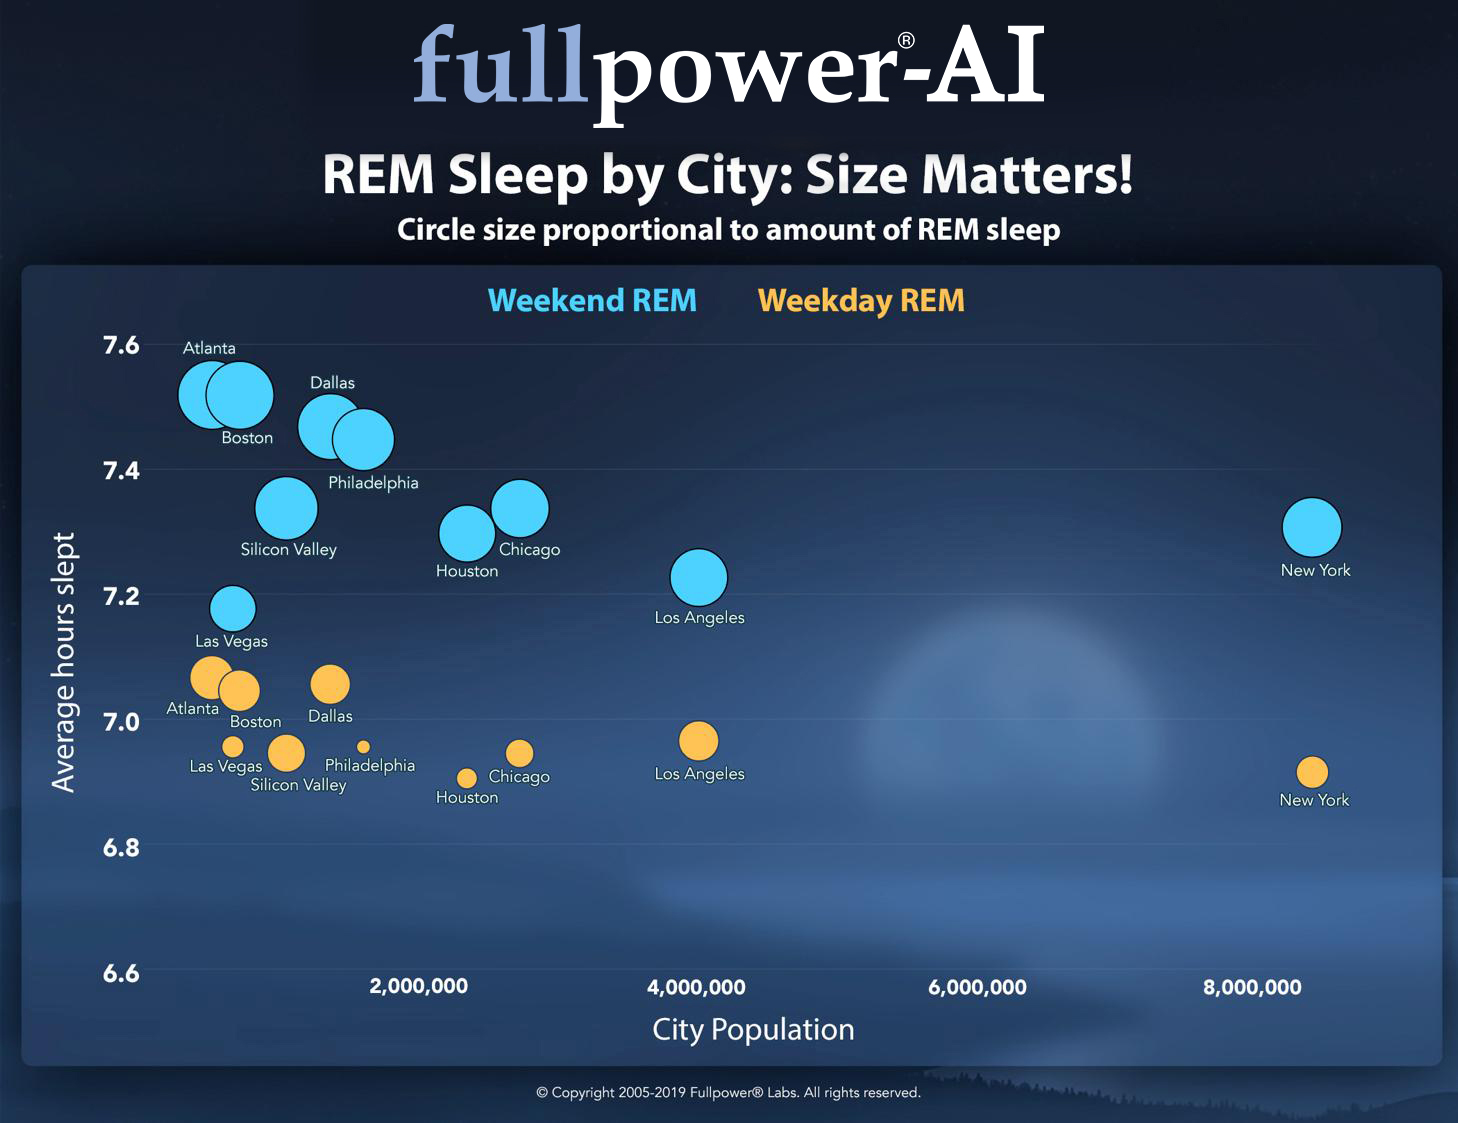 REM Sleep by City: Size Matters!